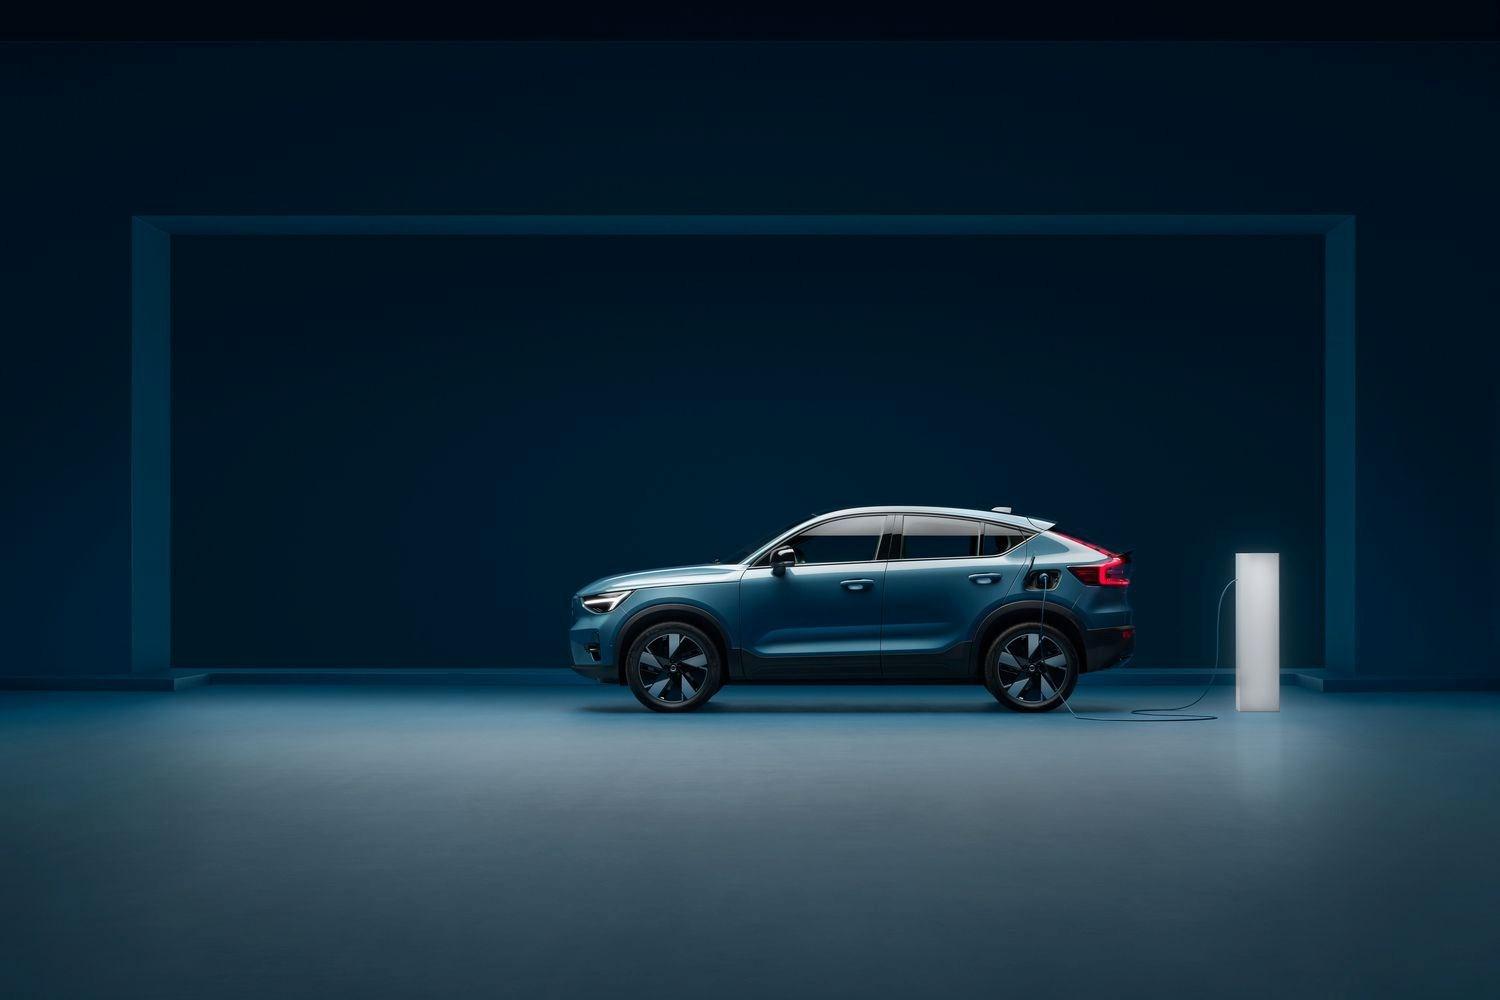 The latest Volvo C40 Recharge charges indoors on an electric charging station